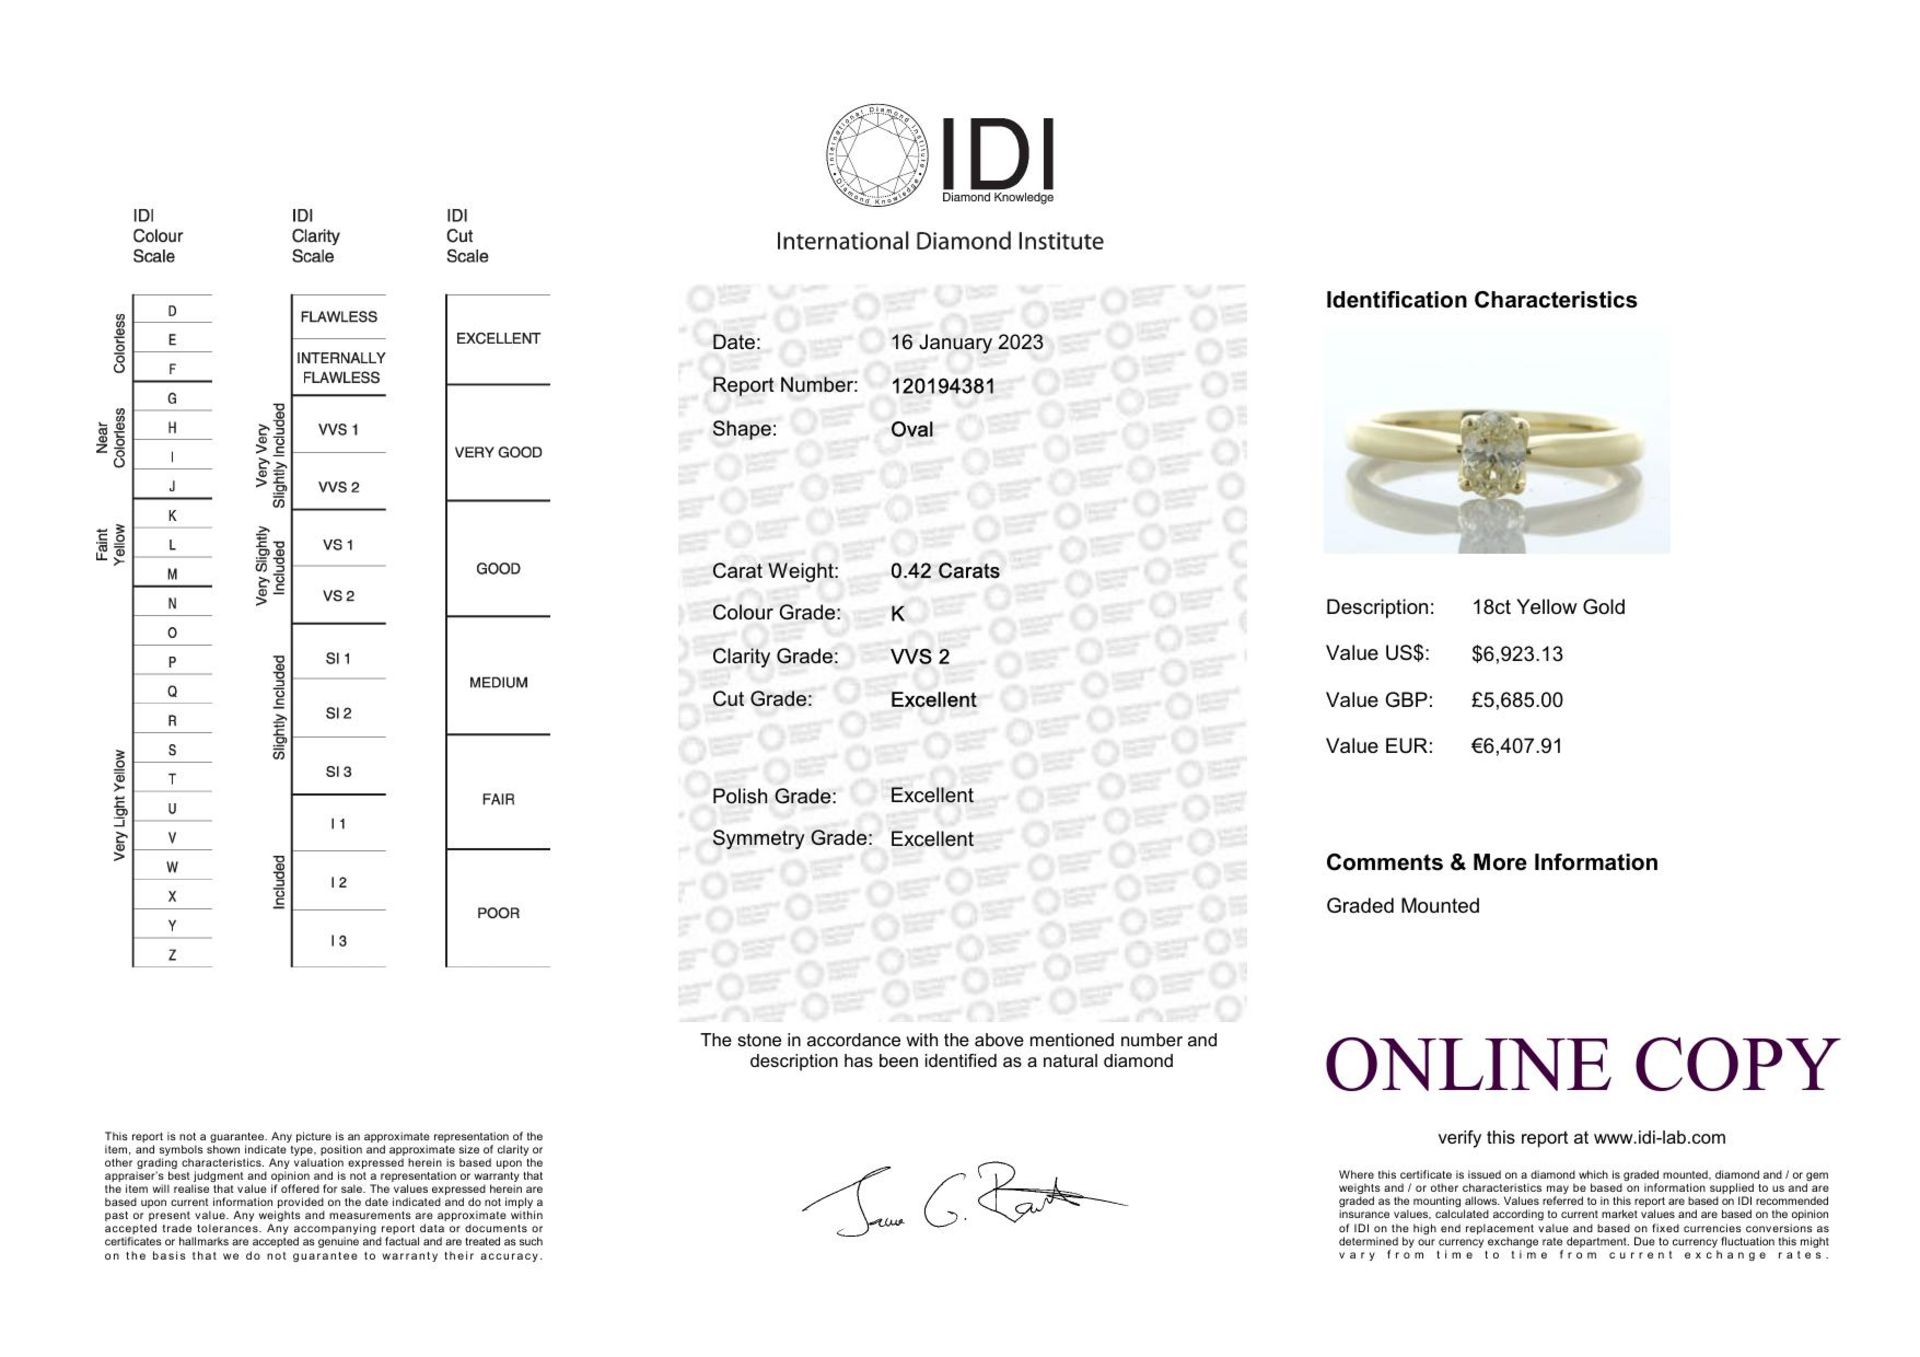 18ct Yellow Gold Single Stone Oval Cut Diamond Ring 0.42 Carats - Valued By IDI £5,685.00 - An - Image 5 of 5